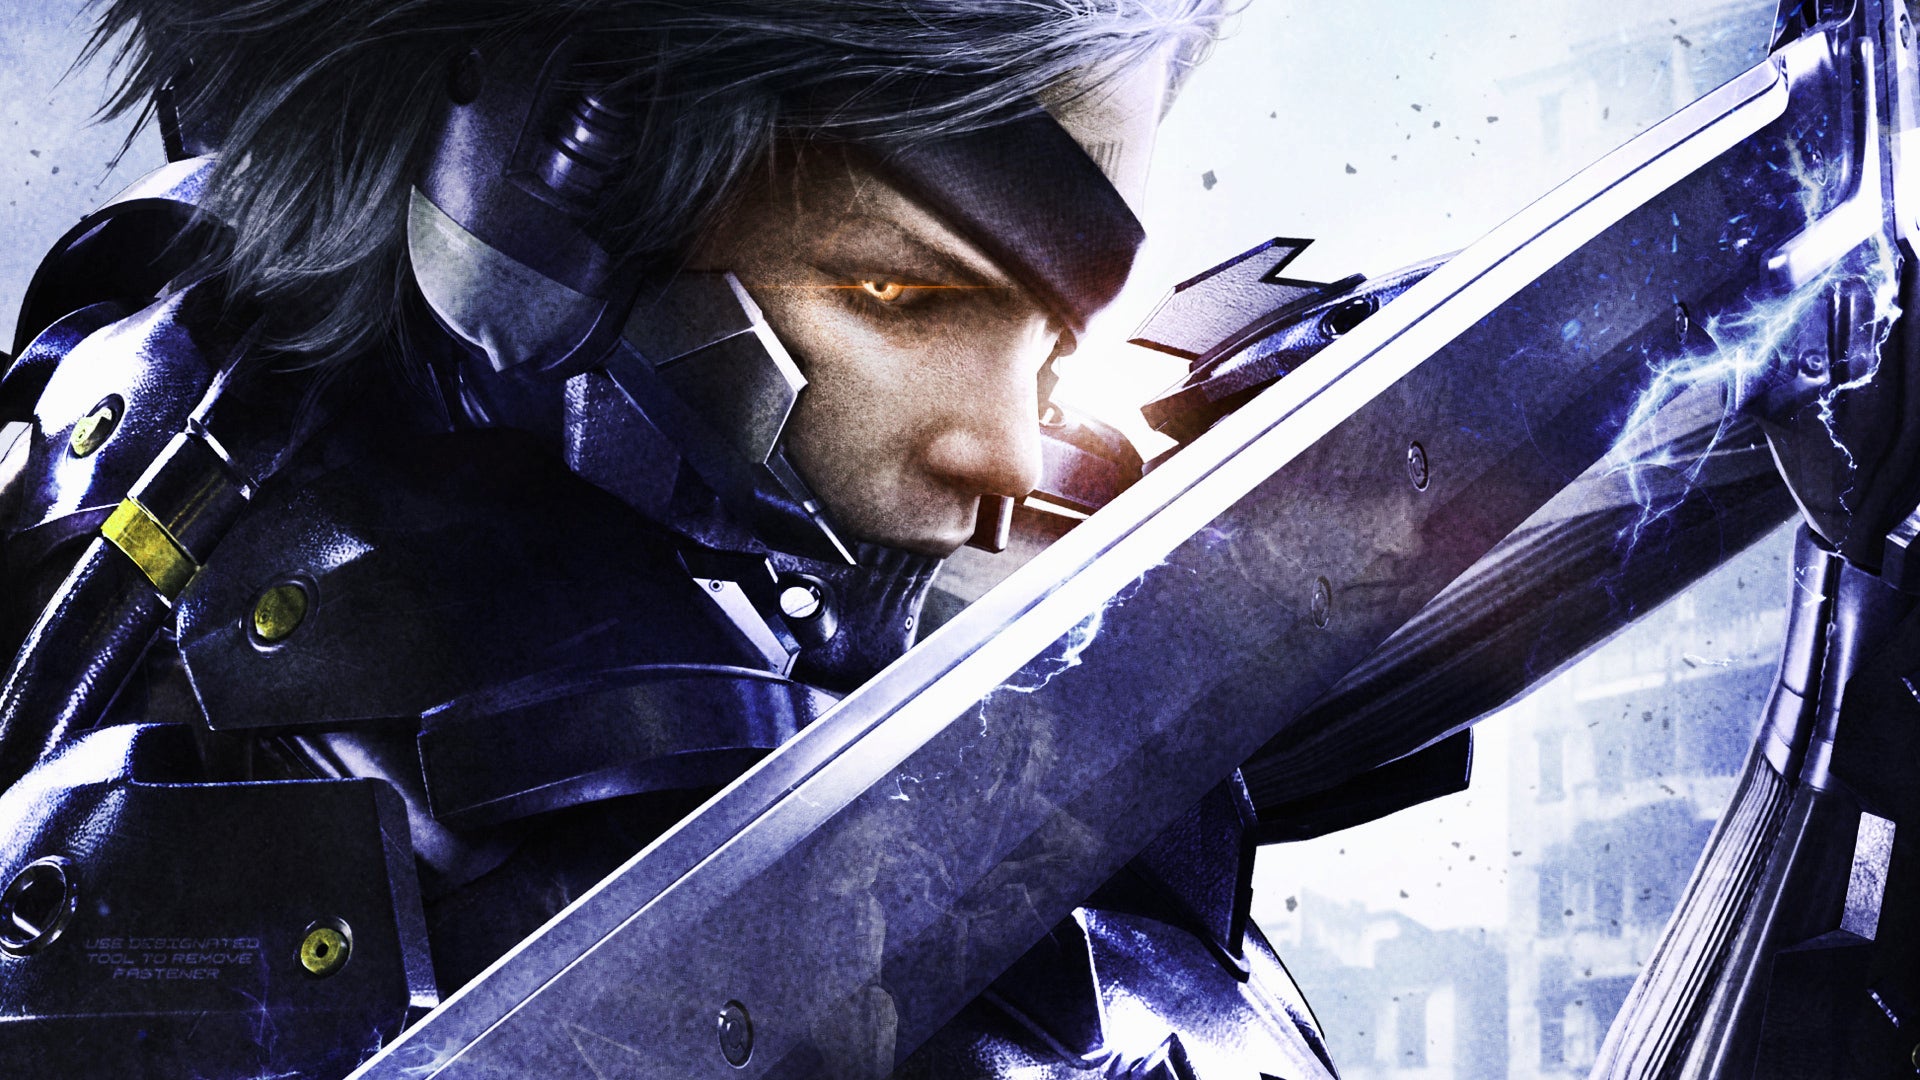 Image for No remake, no remaster – what’s made Metal Gear Rising Revengeance stay so popular for so long?